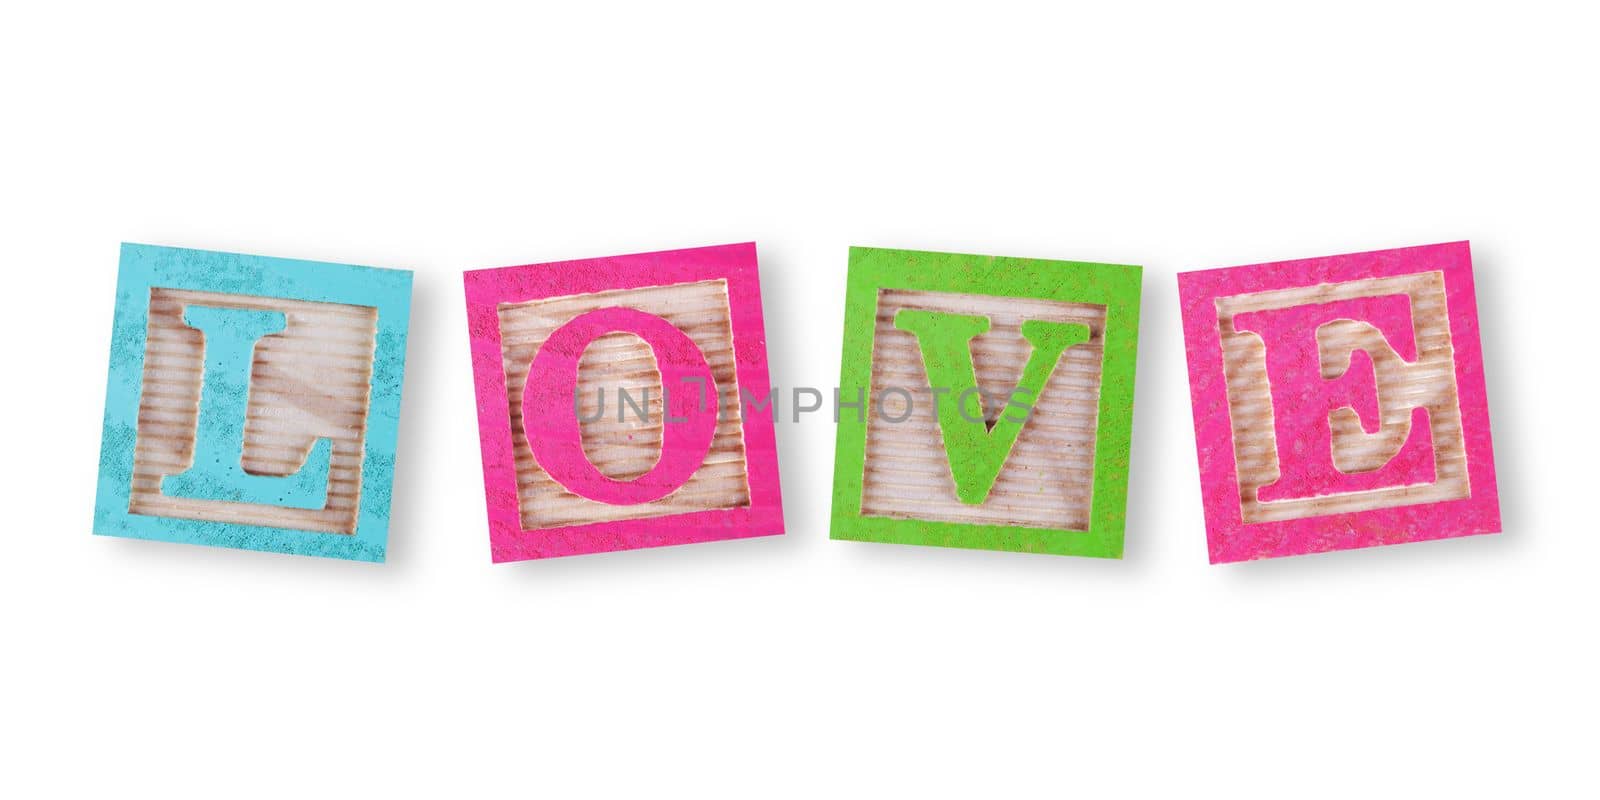 A love concept with childs wood blocks on white with clipping path to remove shadow